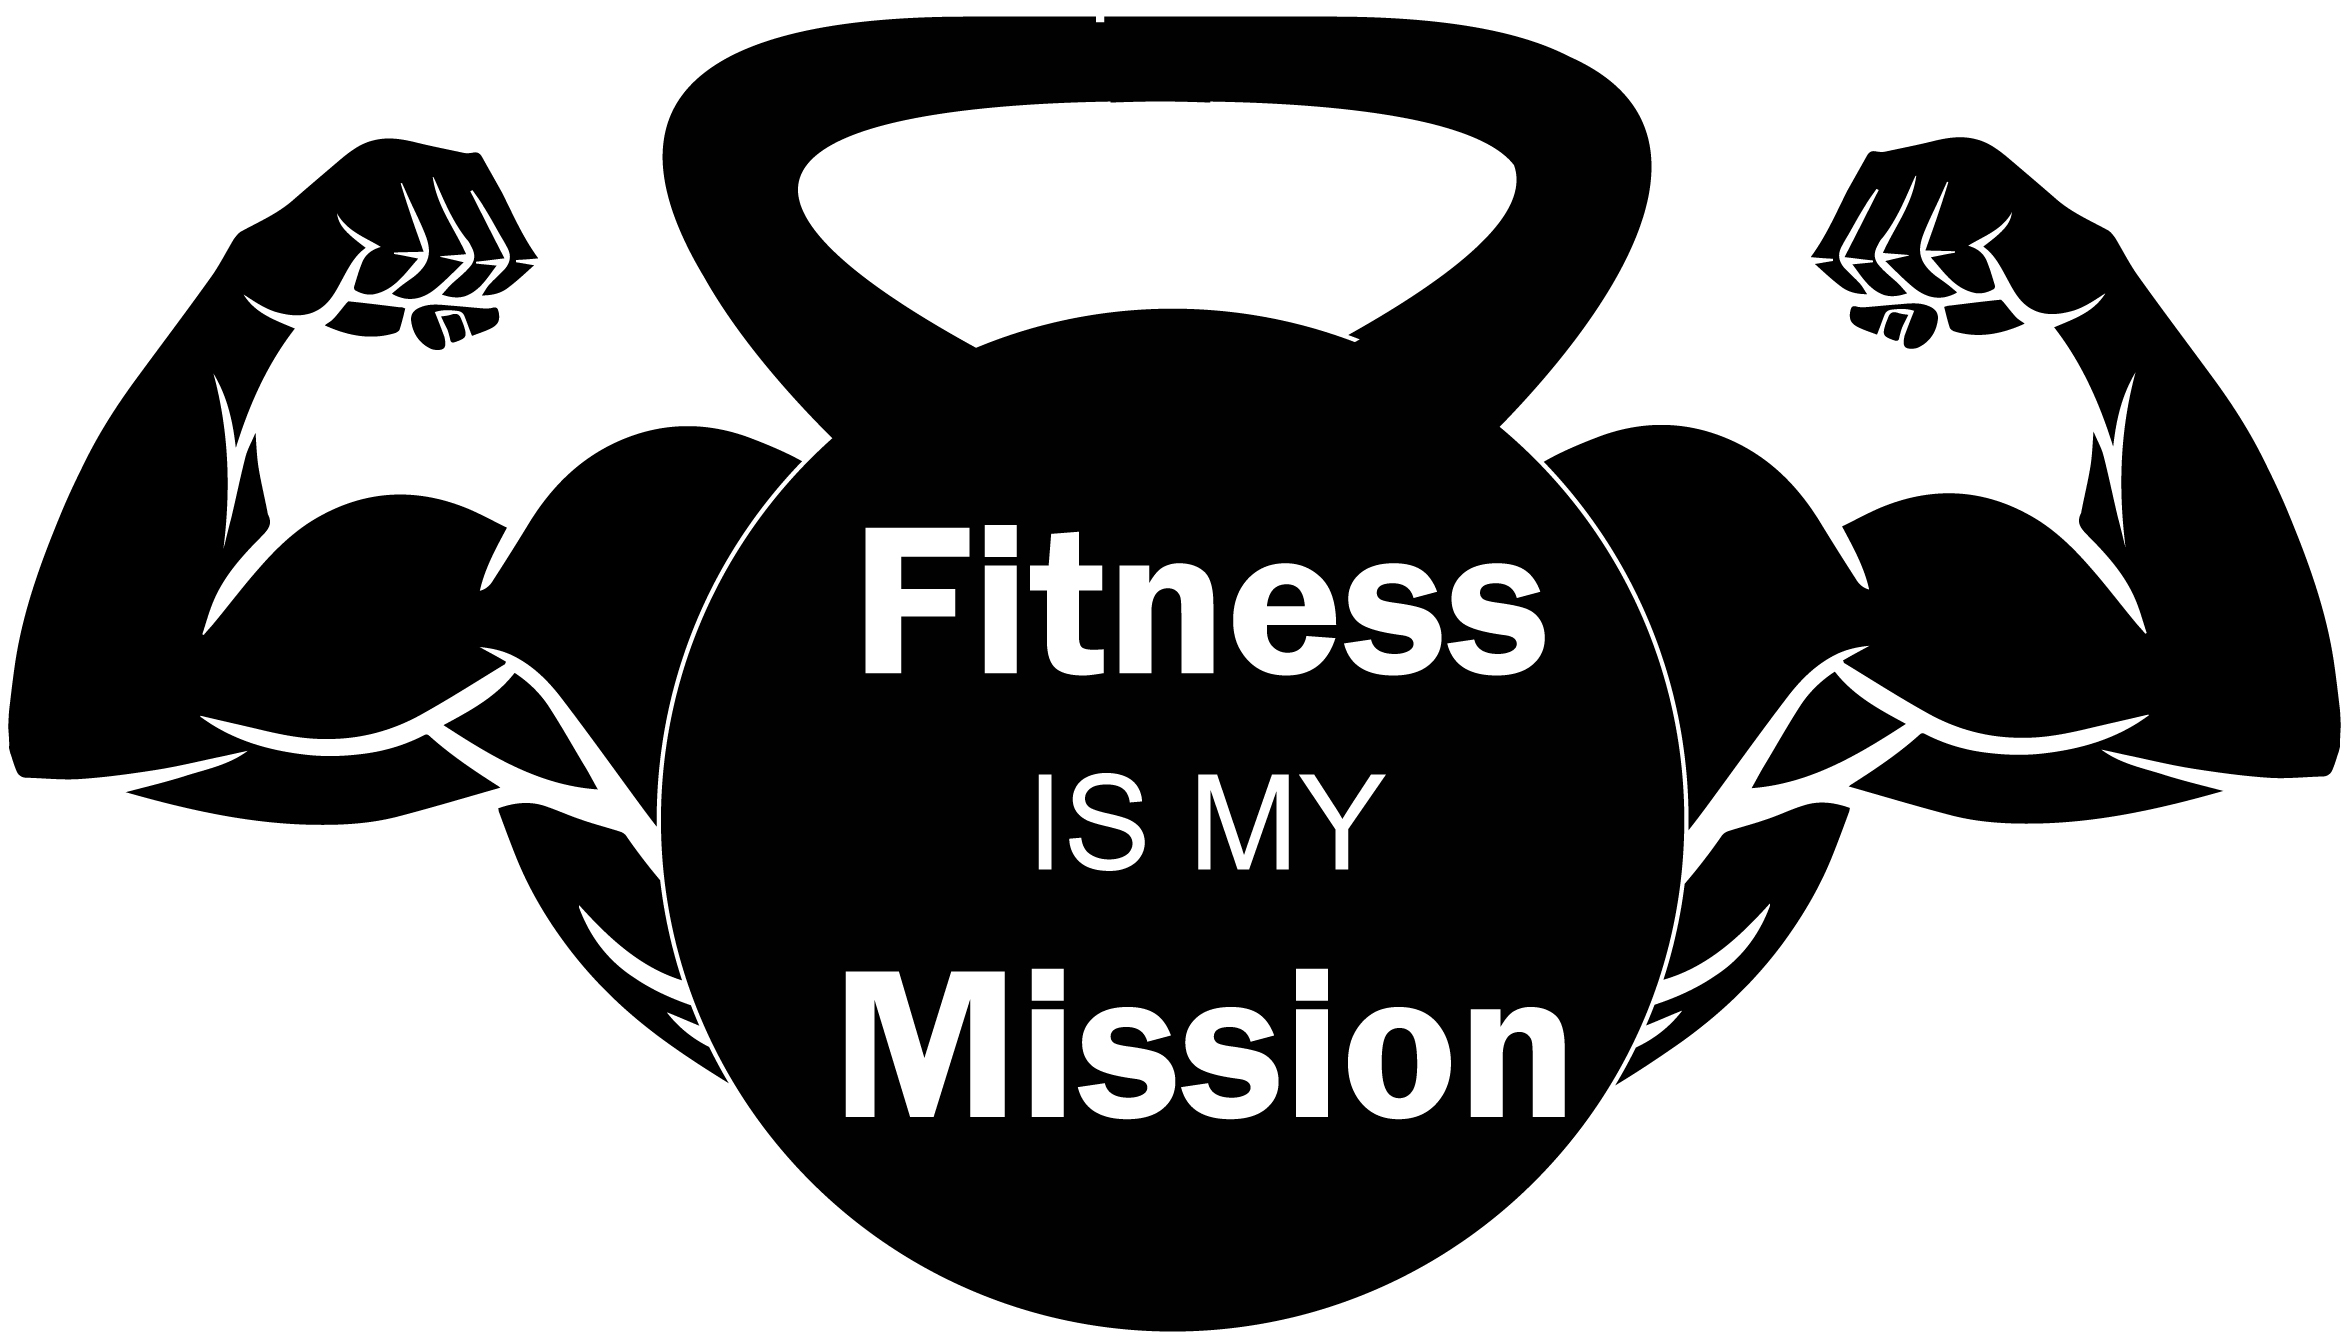 Download Fitness is my mission svg CUT file for Silhouette cameo or ...